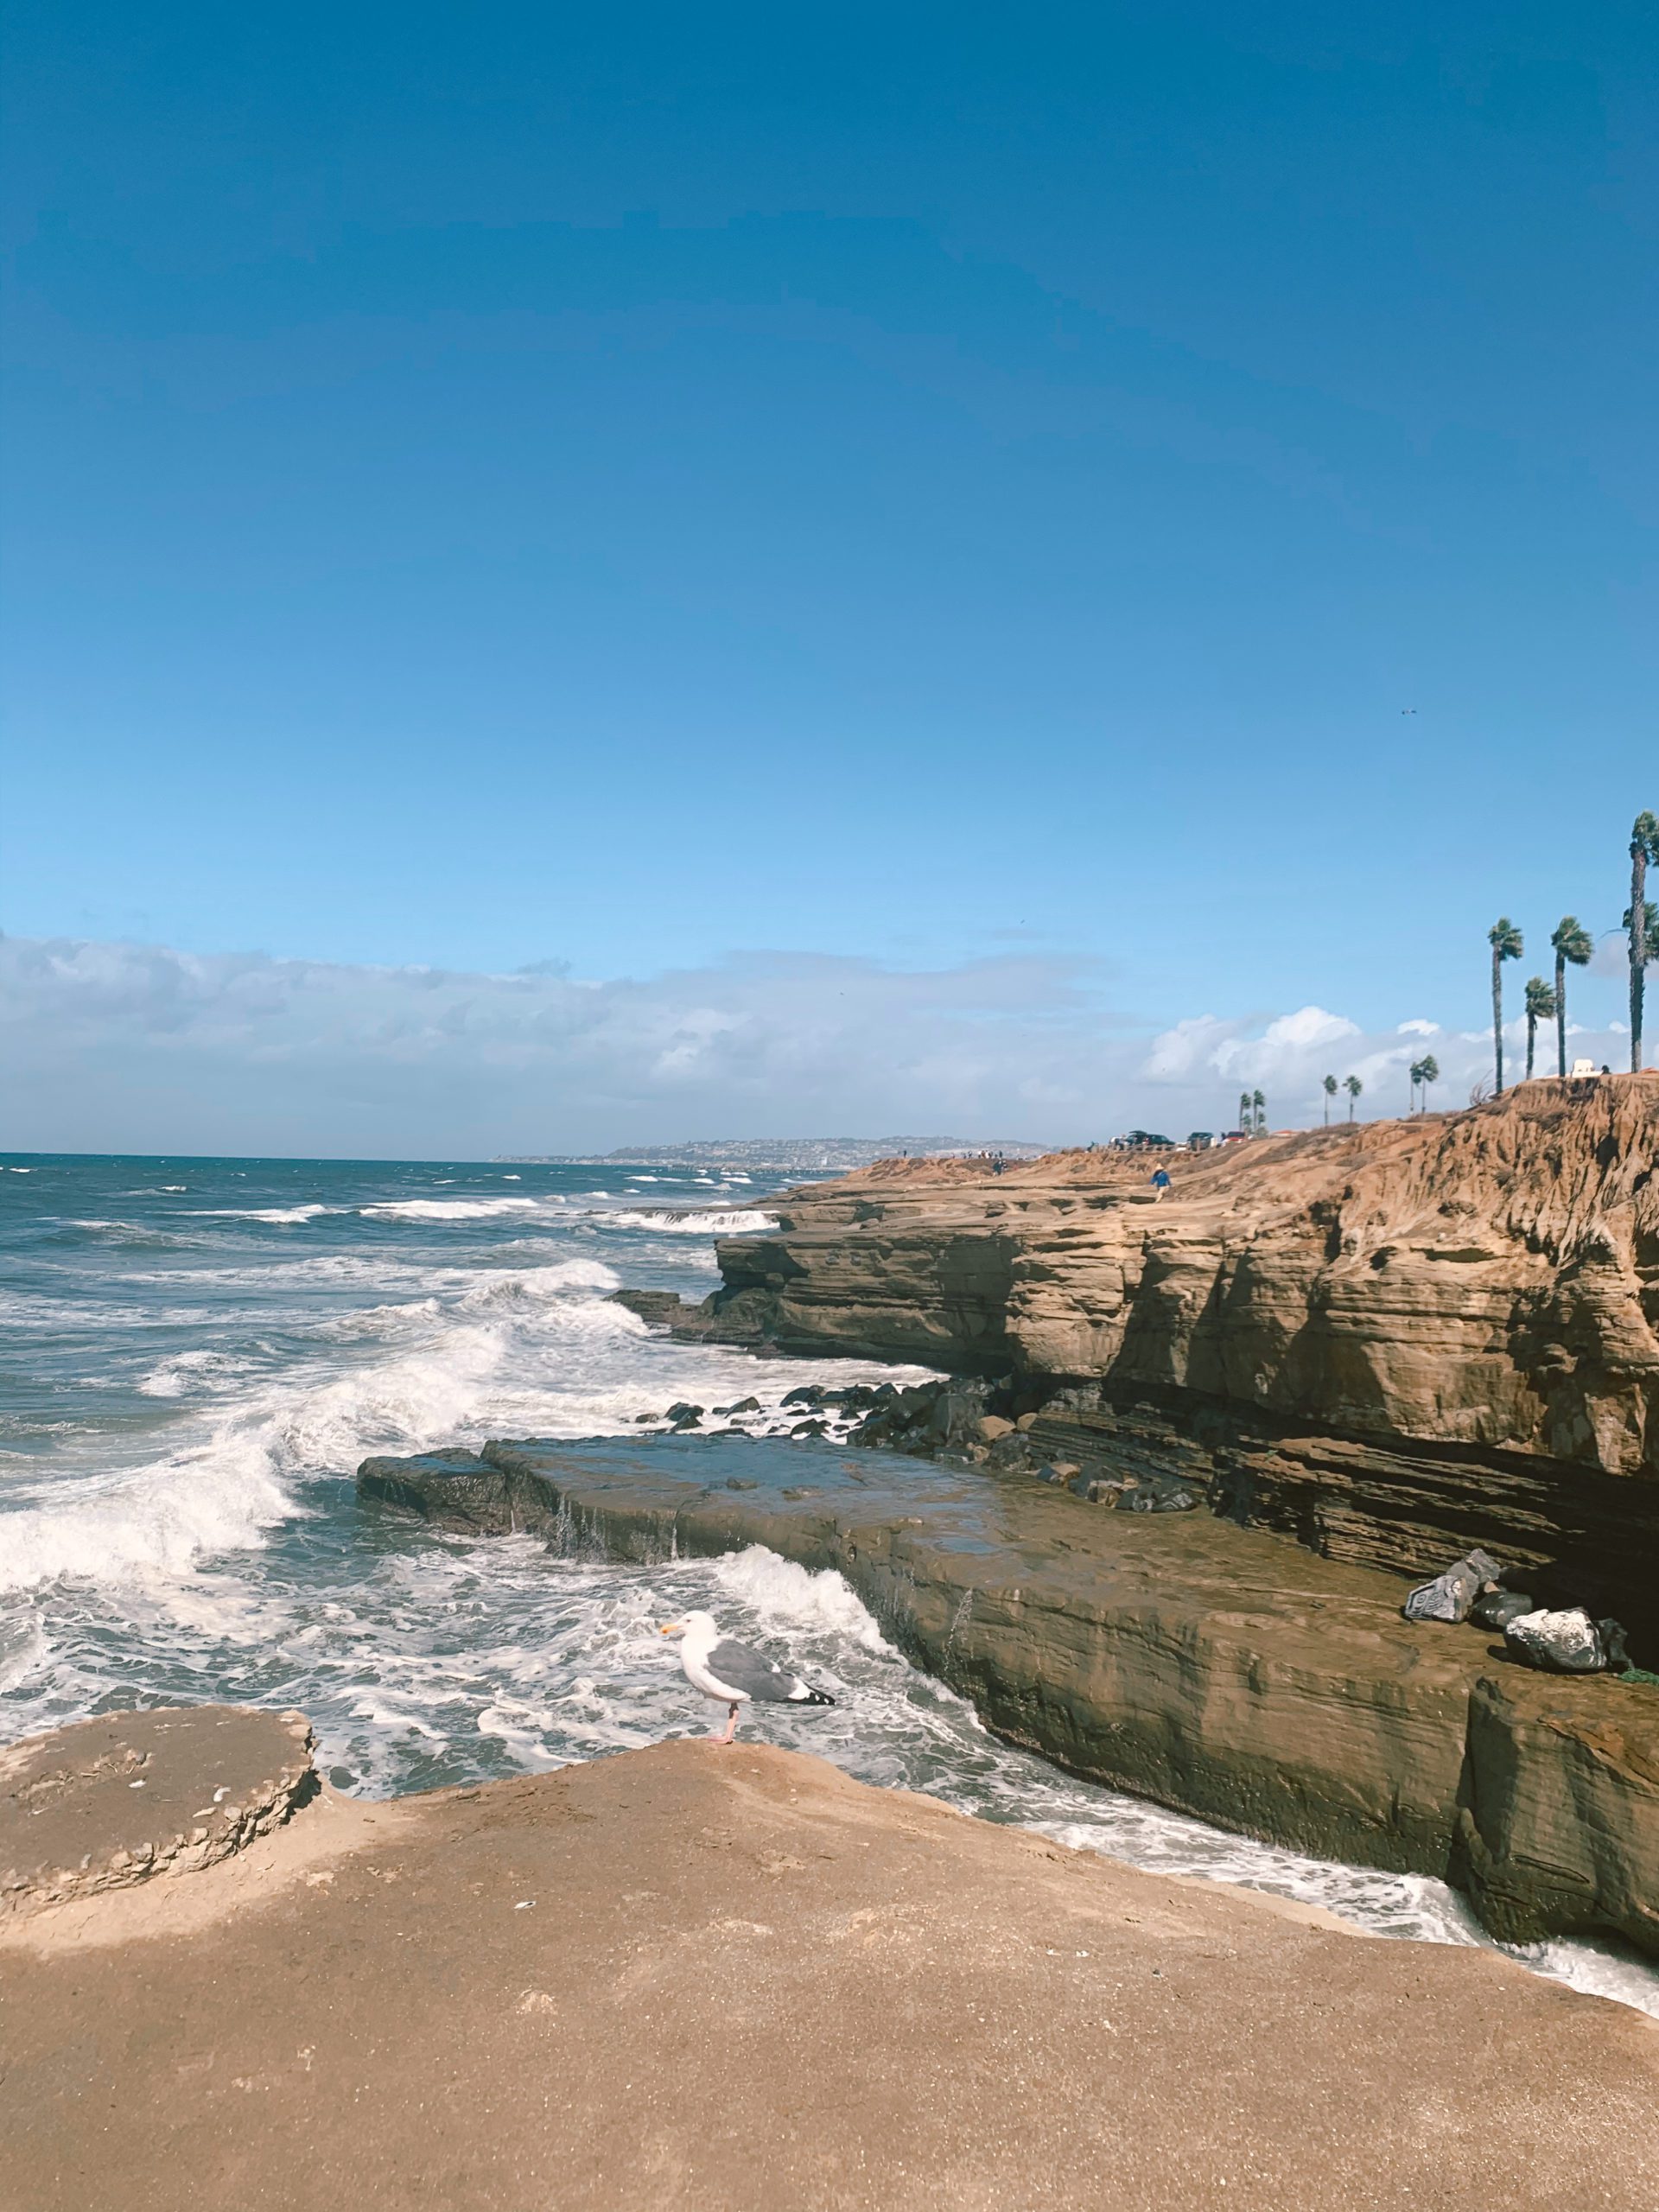 Newbie Places To Visit In San Diego, California